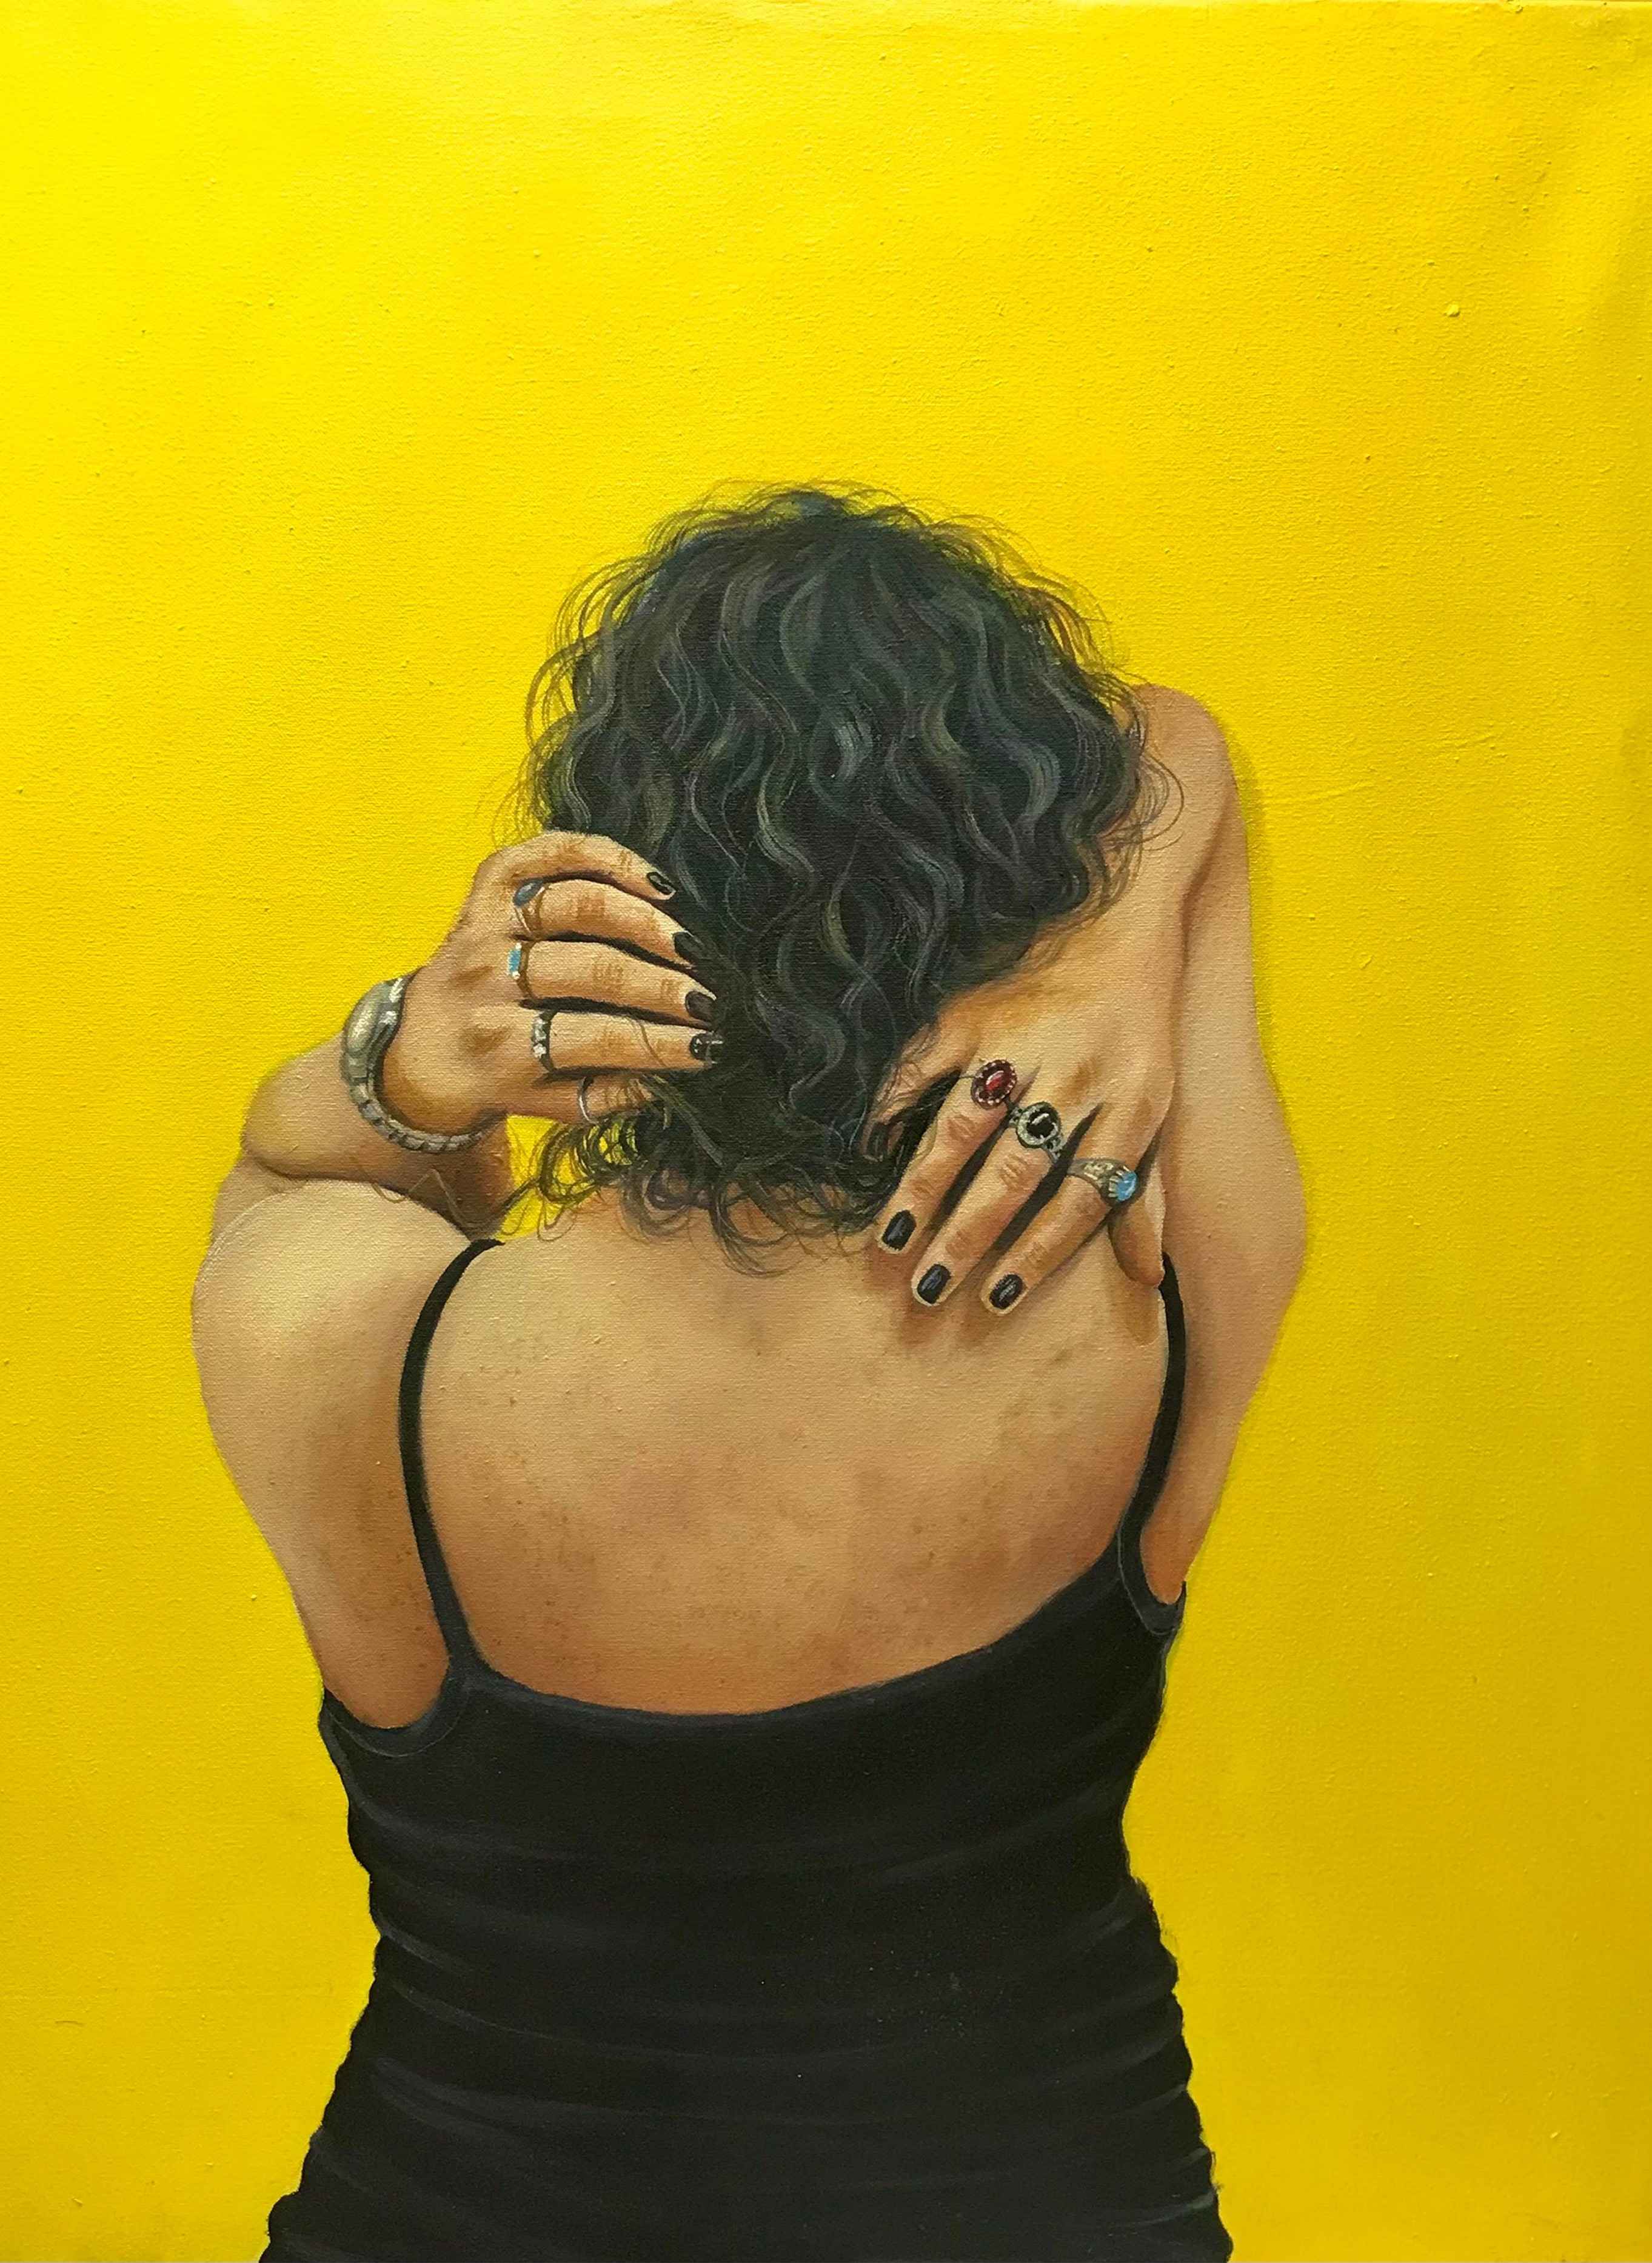 Title:  INTROSPECTION II <br> Medium: Oil on canvas<br> Size: 30x24 inches